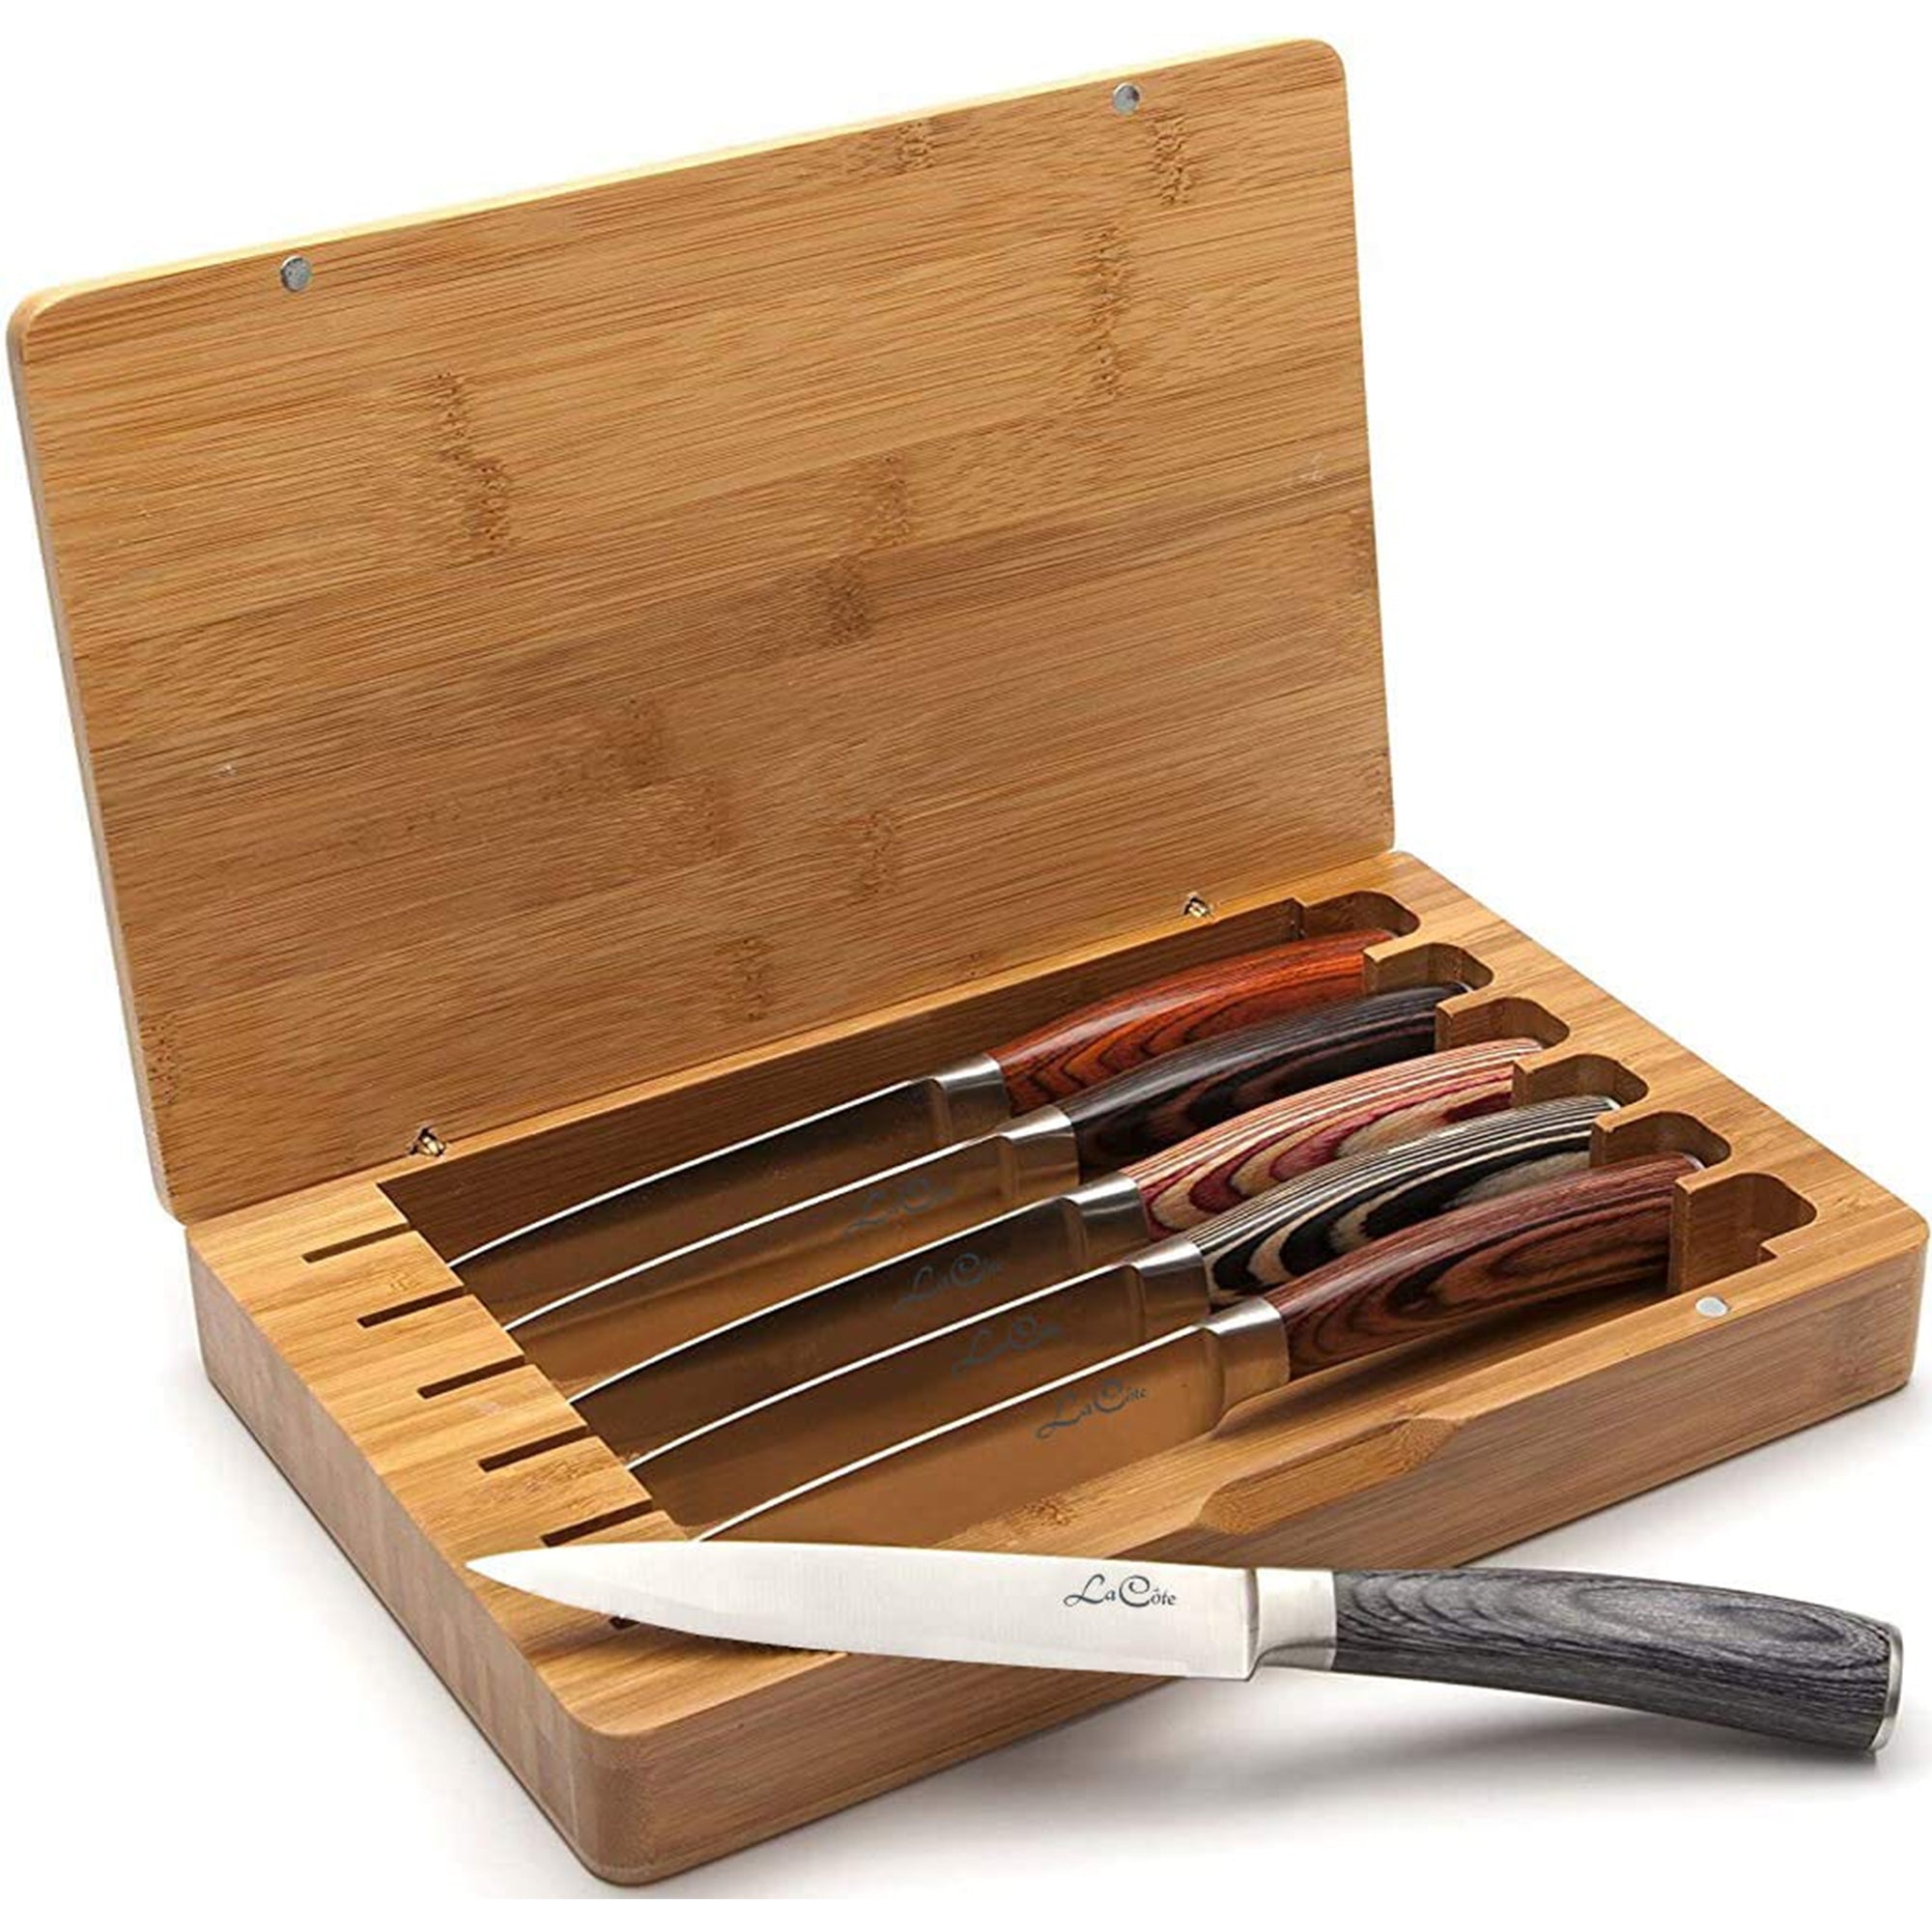 La Cote 6 Piece Steak Knives Set Japanese Stainless Steel Wood Handle In Bamboo Storage Box (6 PC Steak Knife Set - Multi) (Straight Edge blades in Bamboo Box)